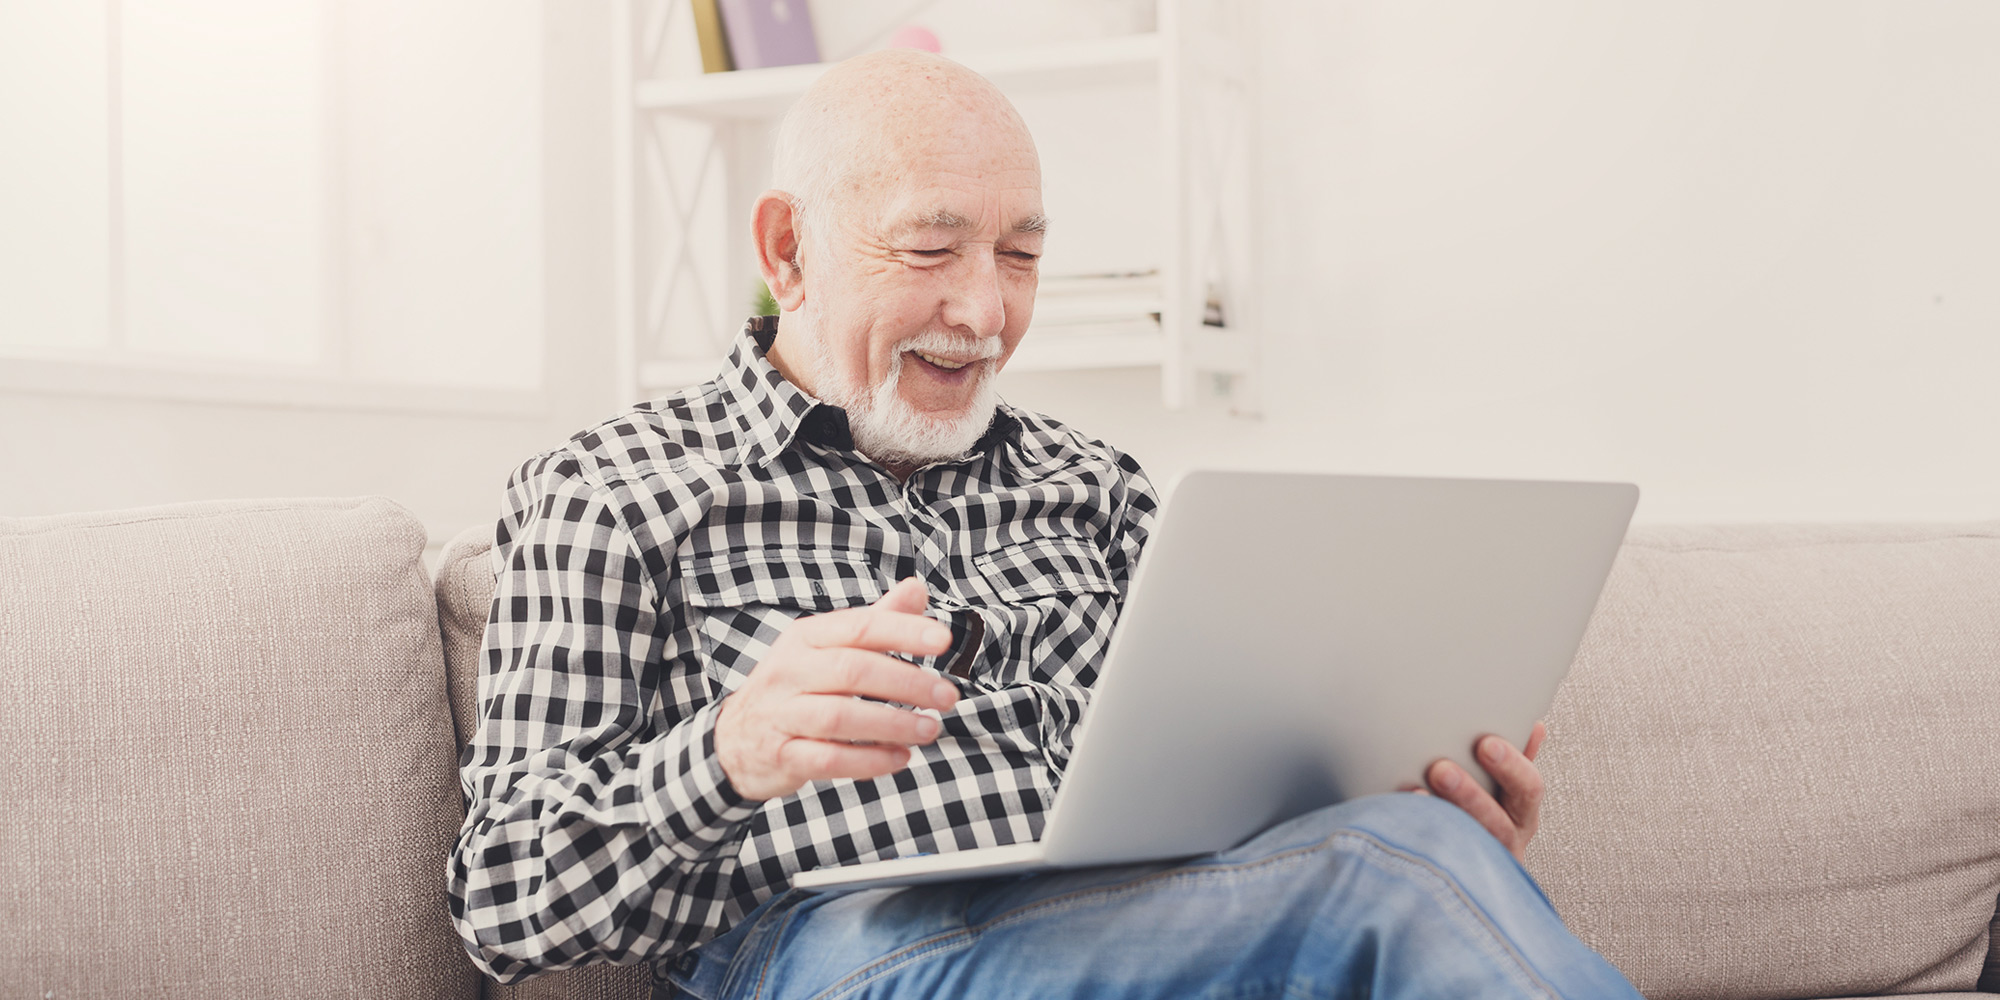 Male cancer patient using telehealth